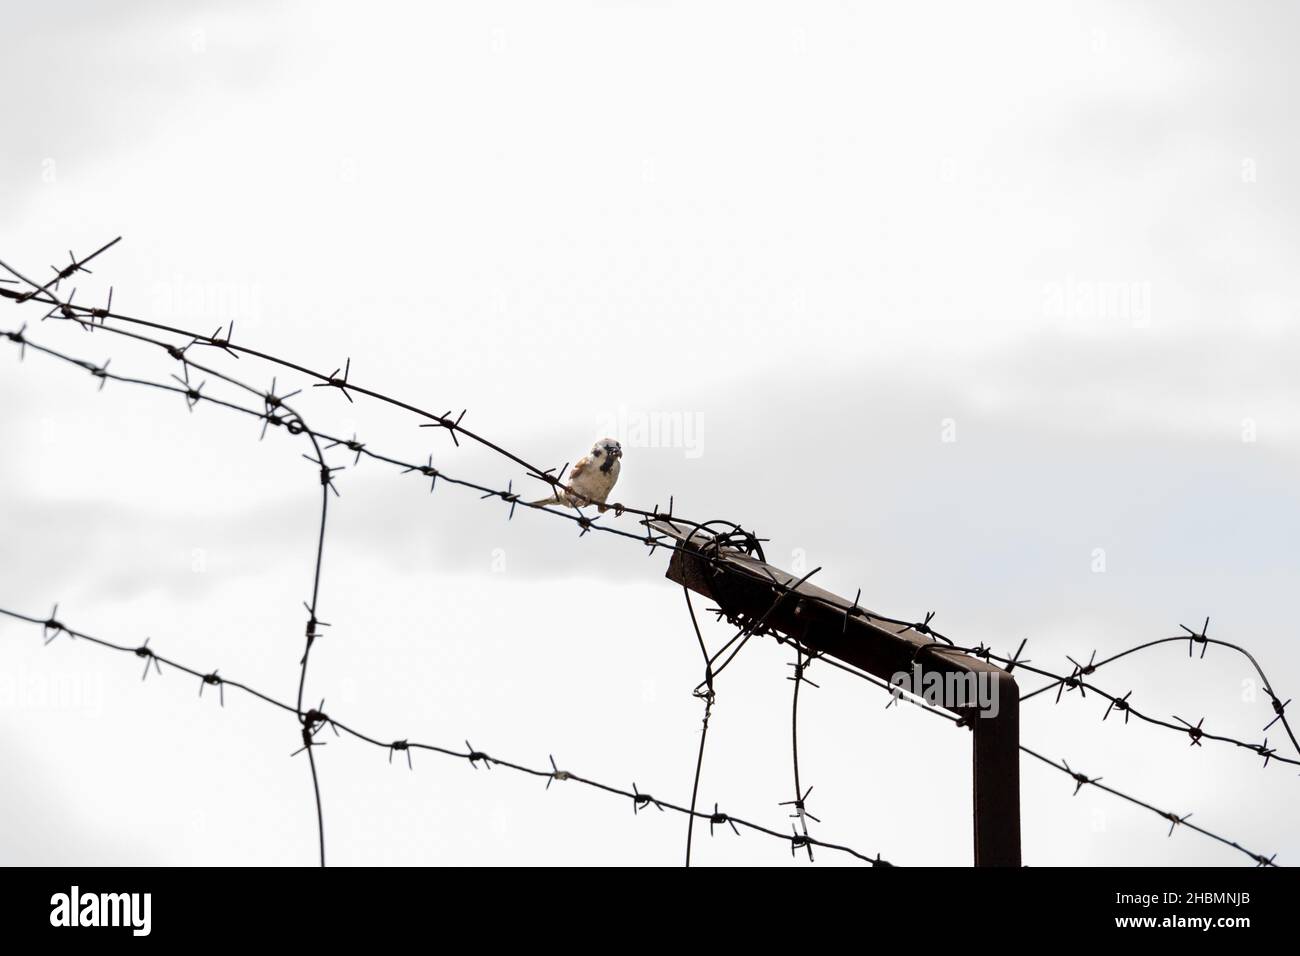 a sparrow sitting on a barbed wire against a darkening sky, concept photography Stock Photo